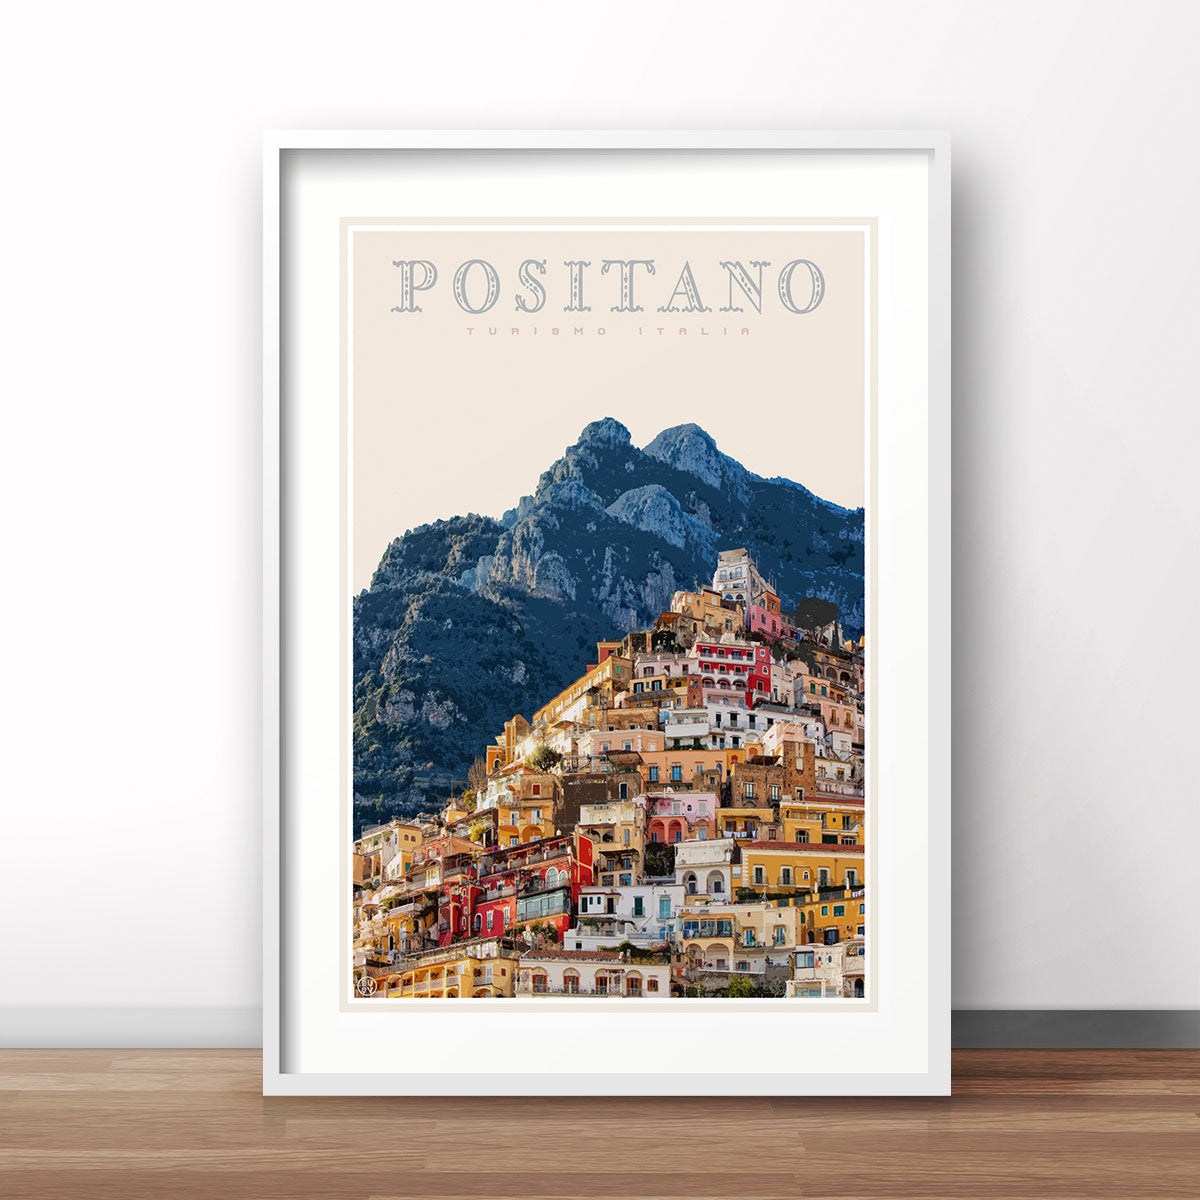 Positano vintage travel style poster by places we luv